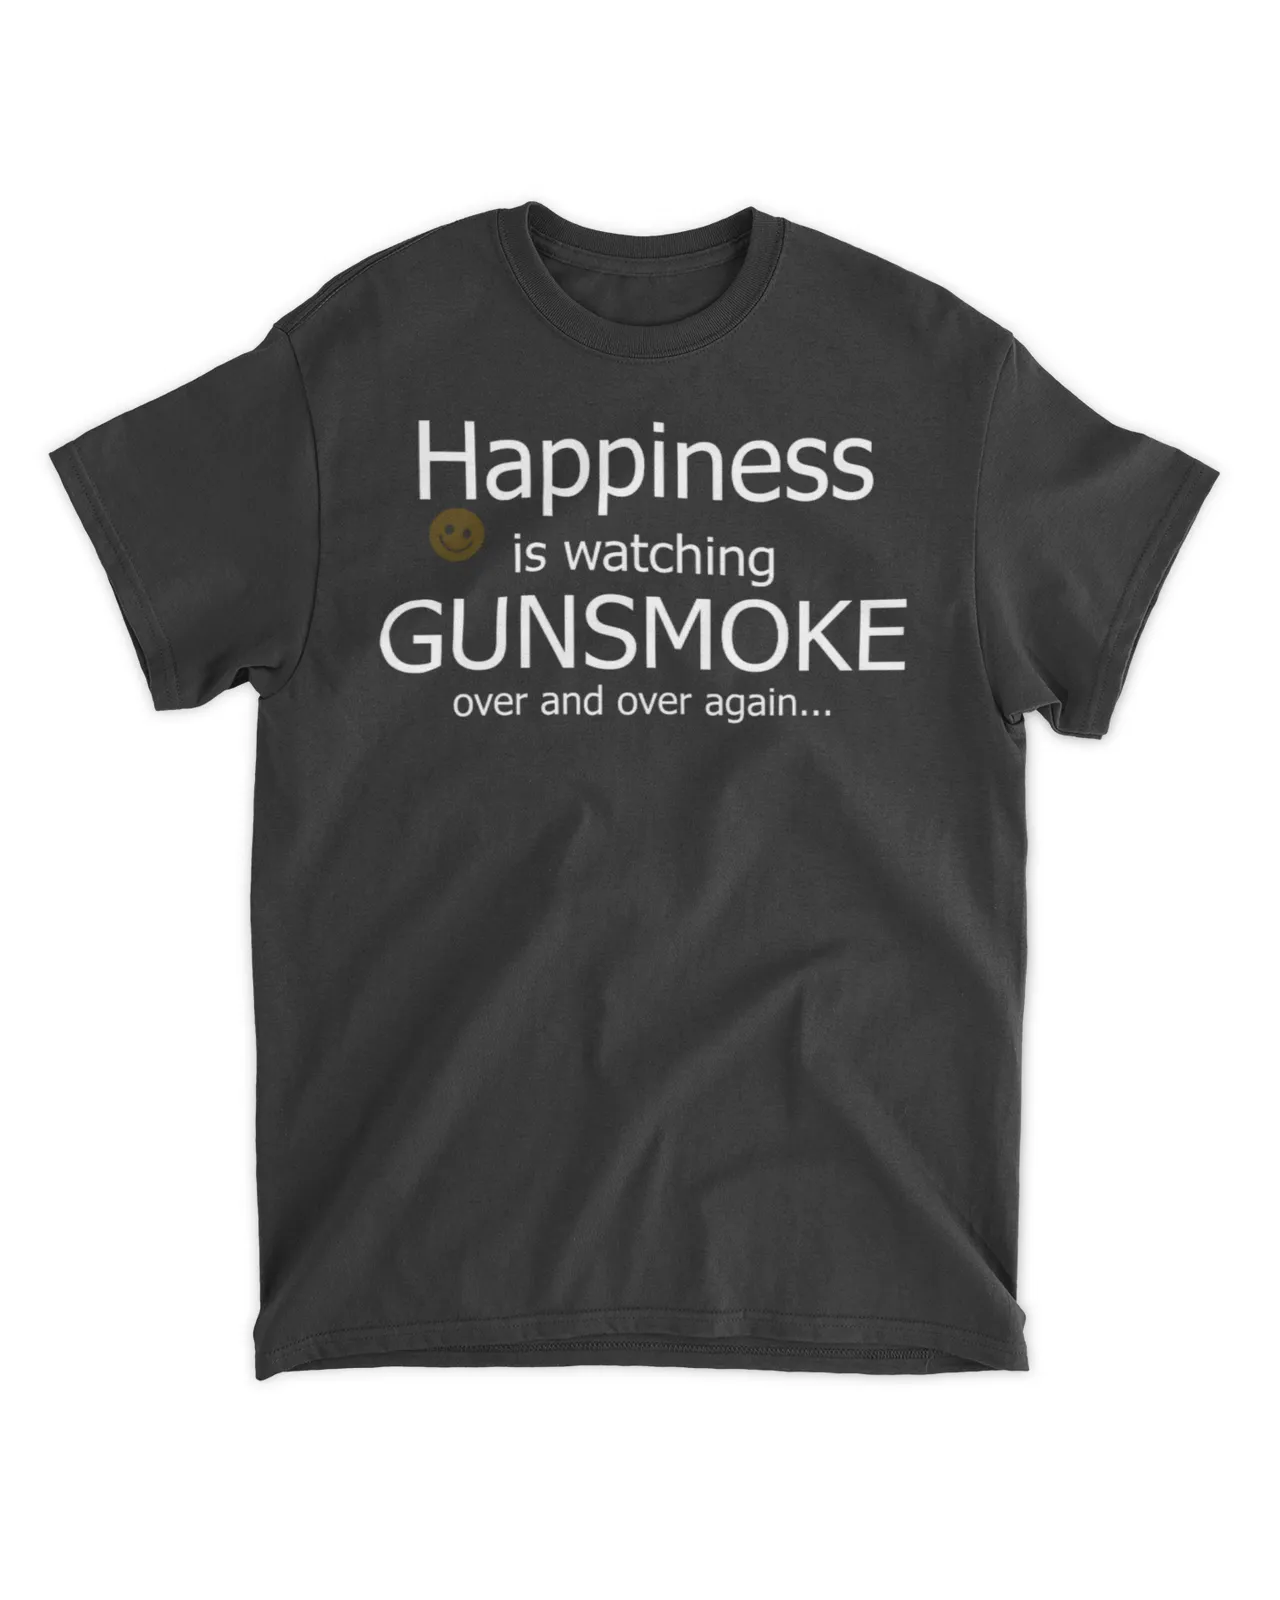  Happiness is watching gunsmoke over and over again shirt